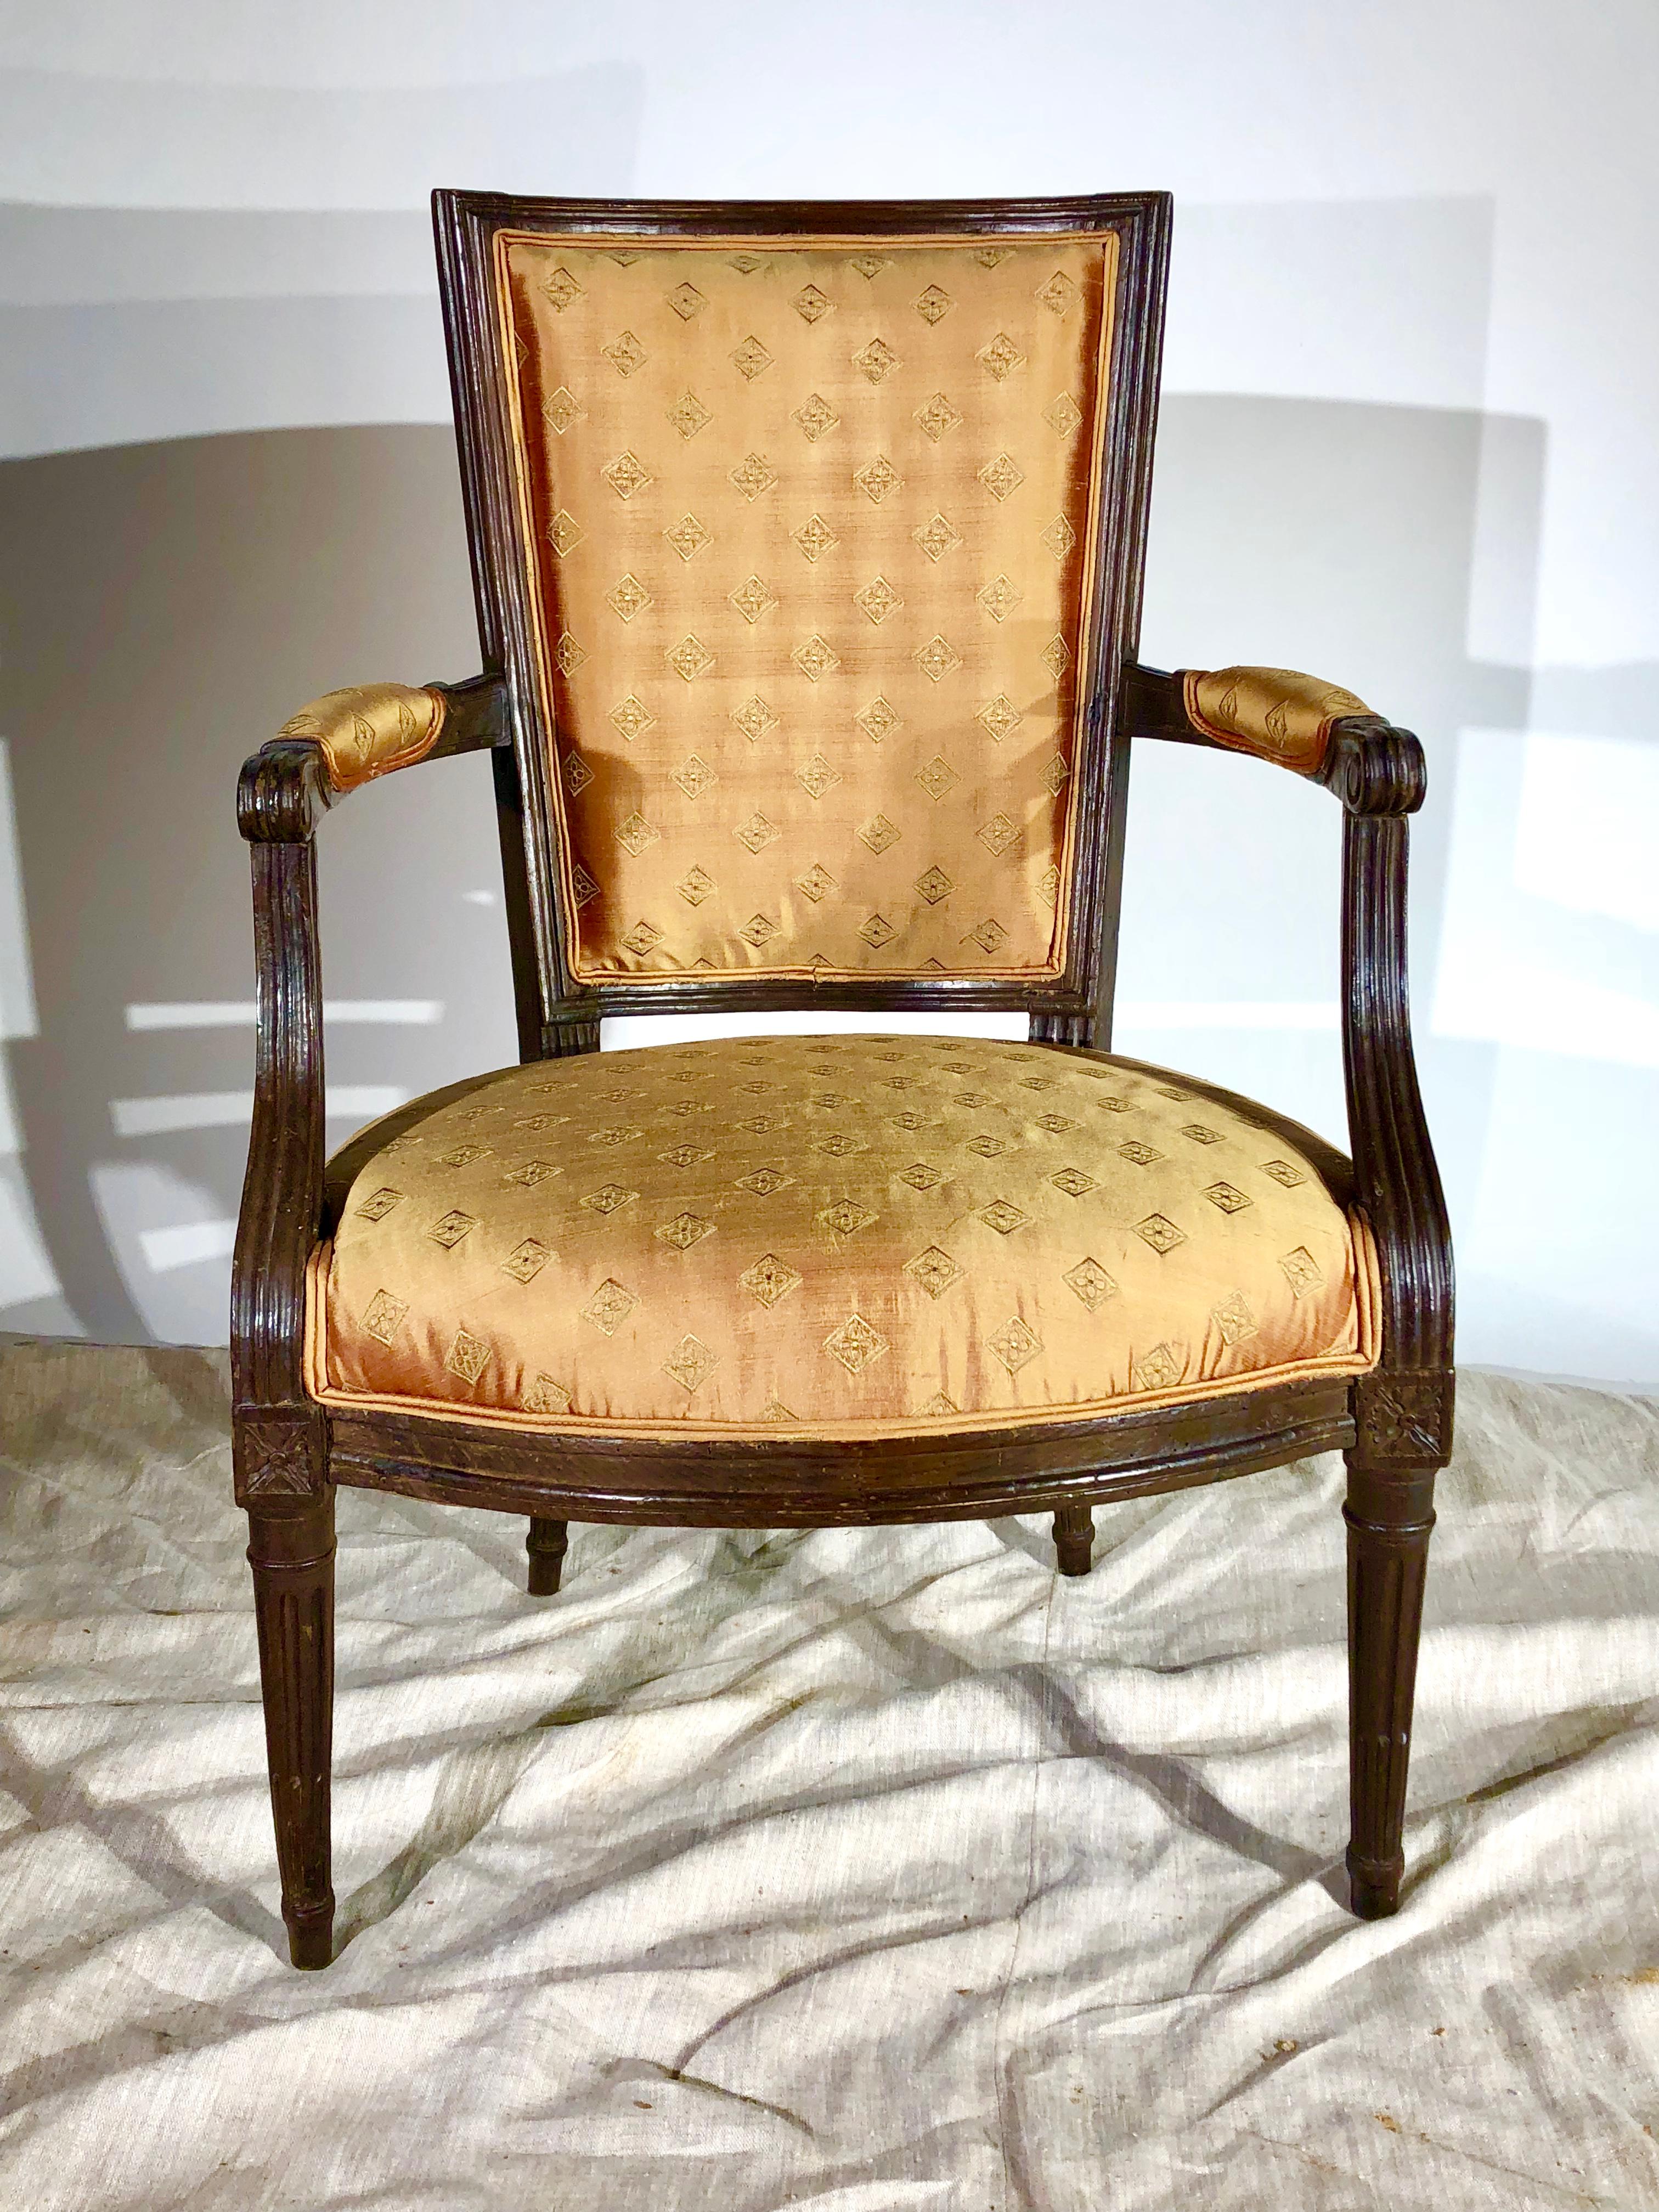 A French Louis XVI Period Fauteuil in stained beechwood, with silk upholstery, circa 1790.